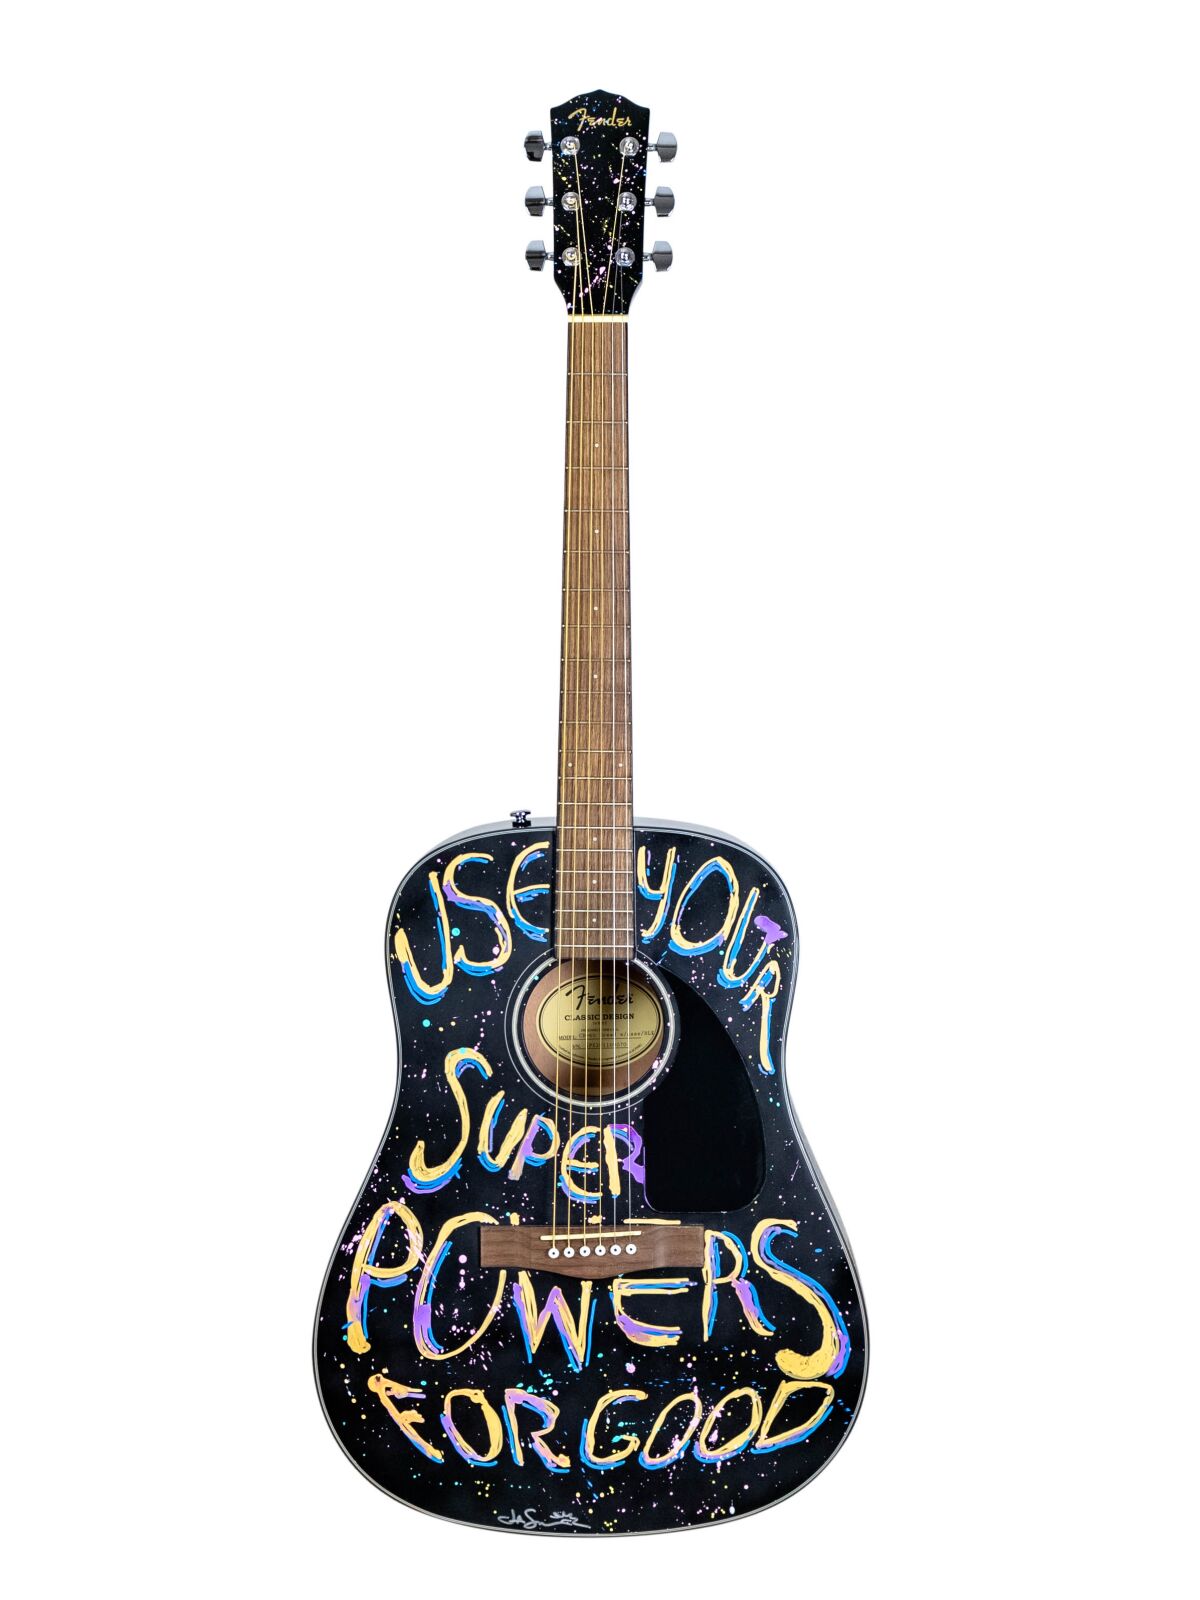 A guitar designed by Jason Mraz will be auctioned off at this year's Mission Fed ArtWalk.